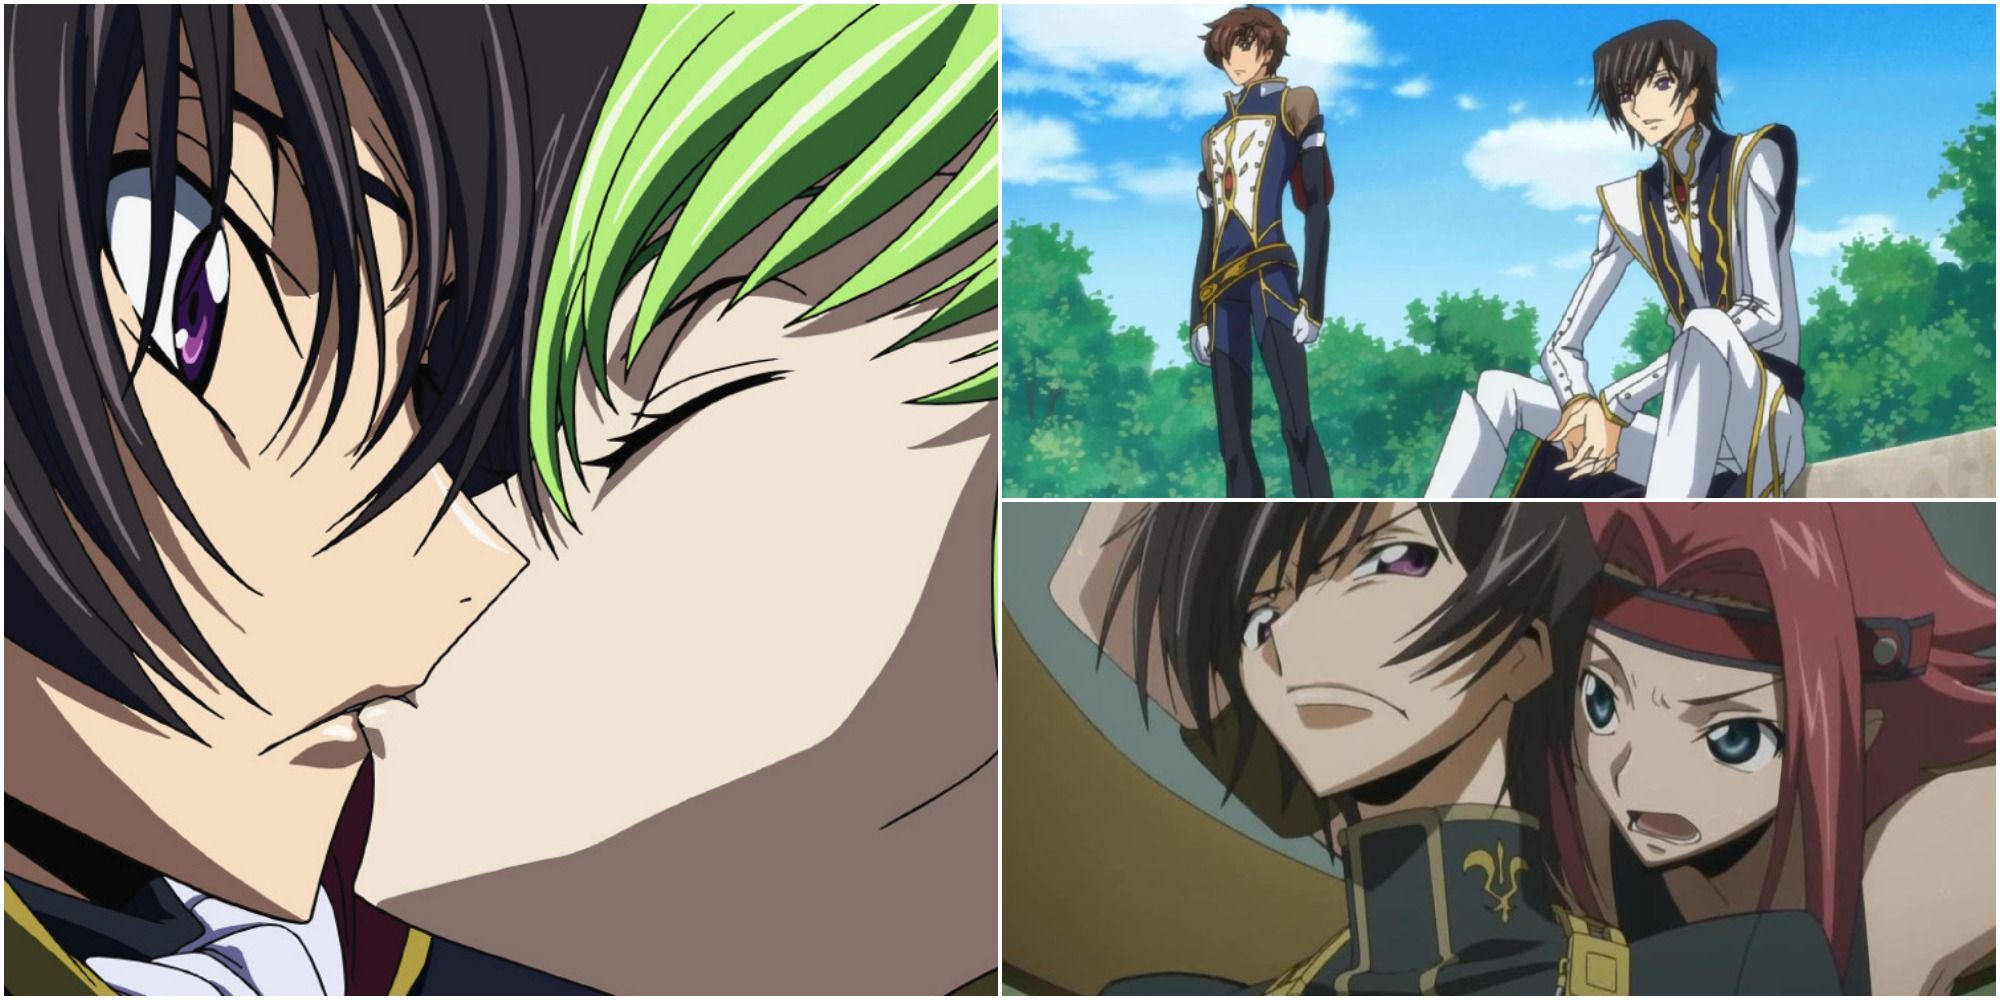 So Lelouch after getting second Geass eye is now once again have